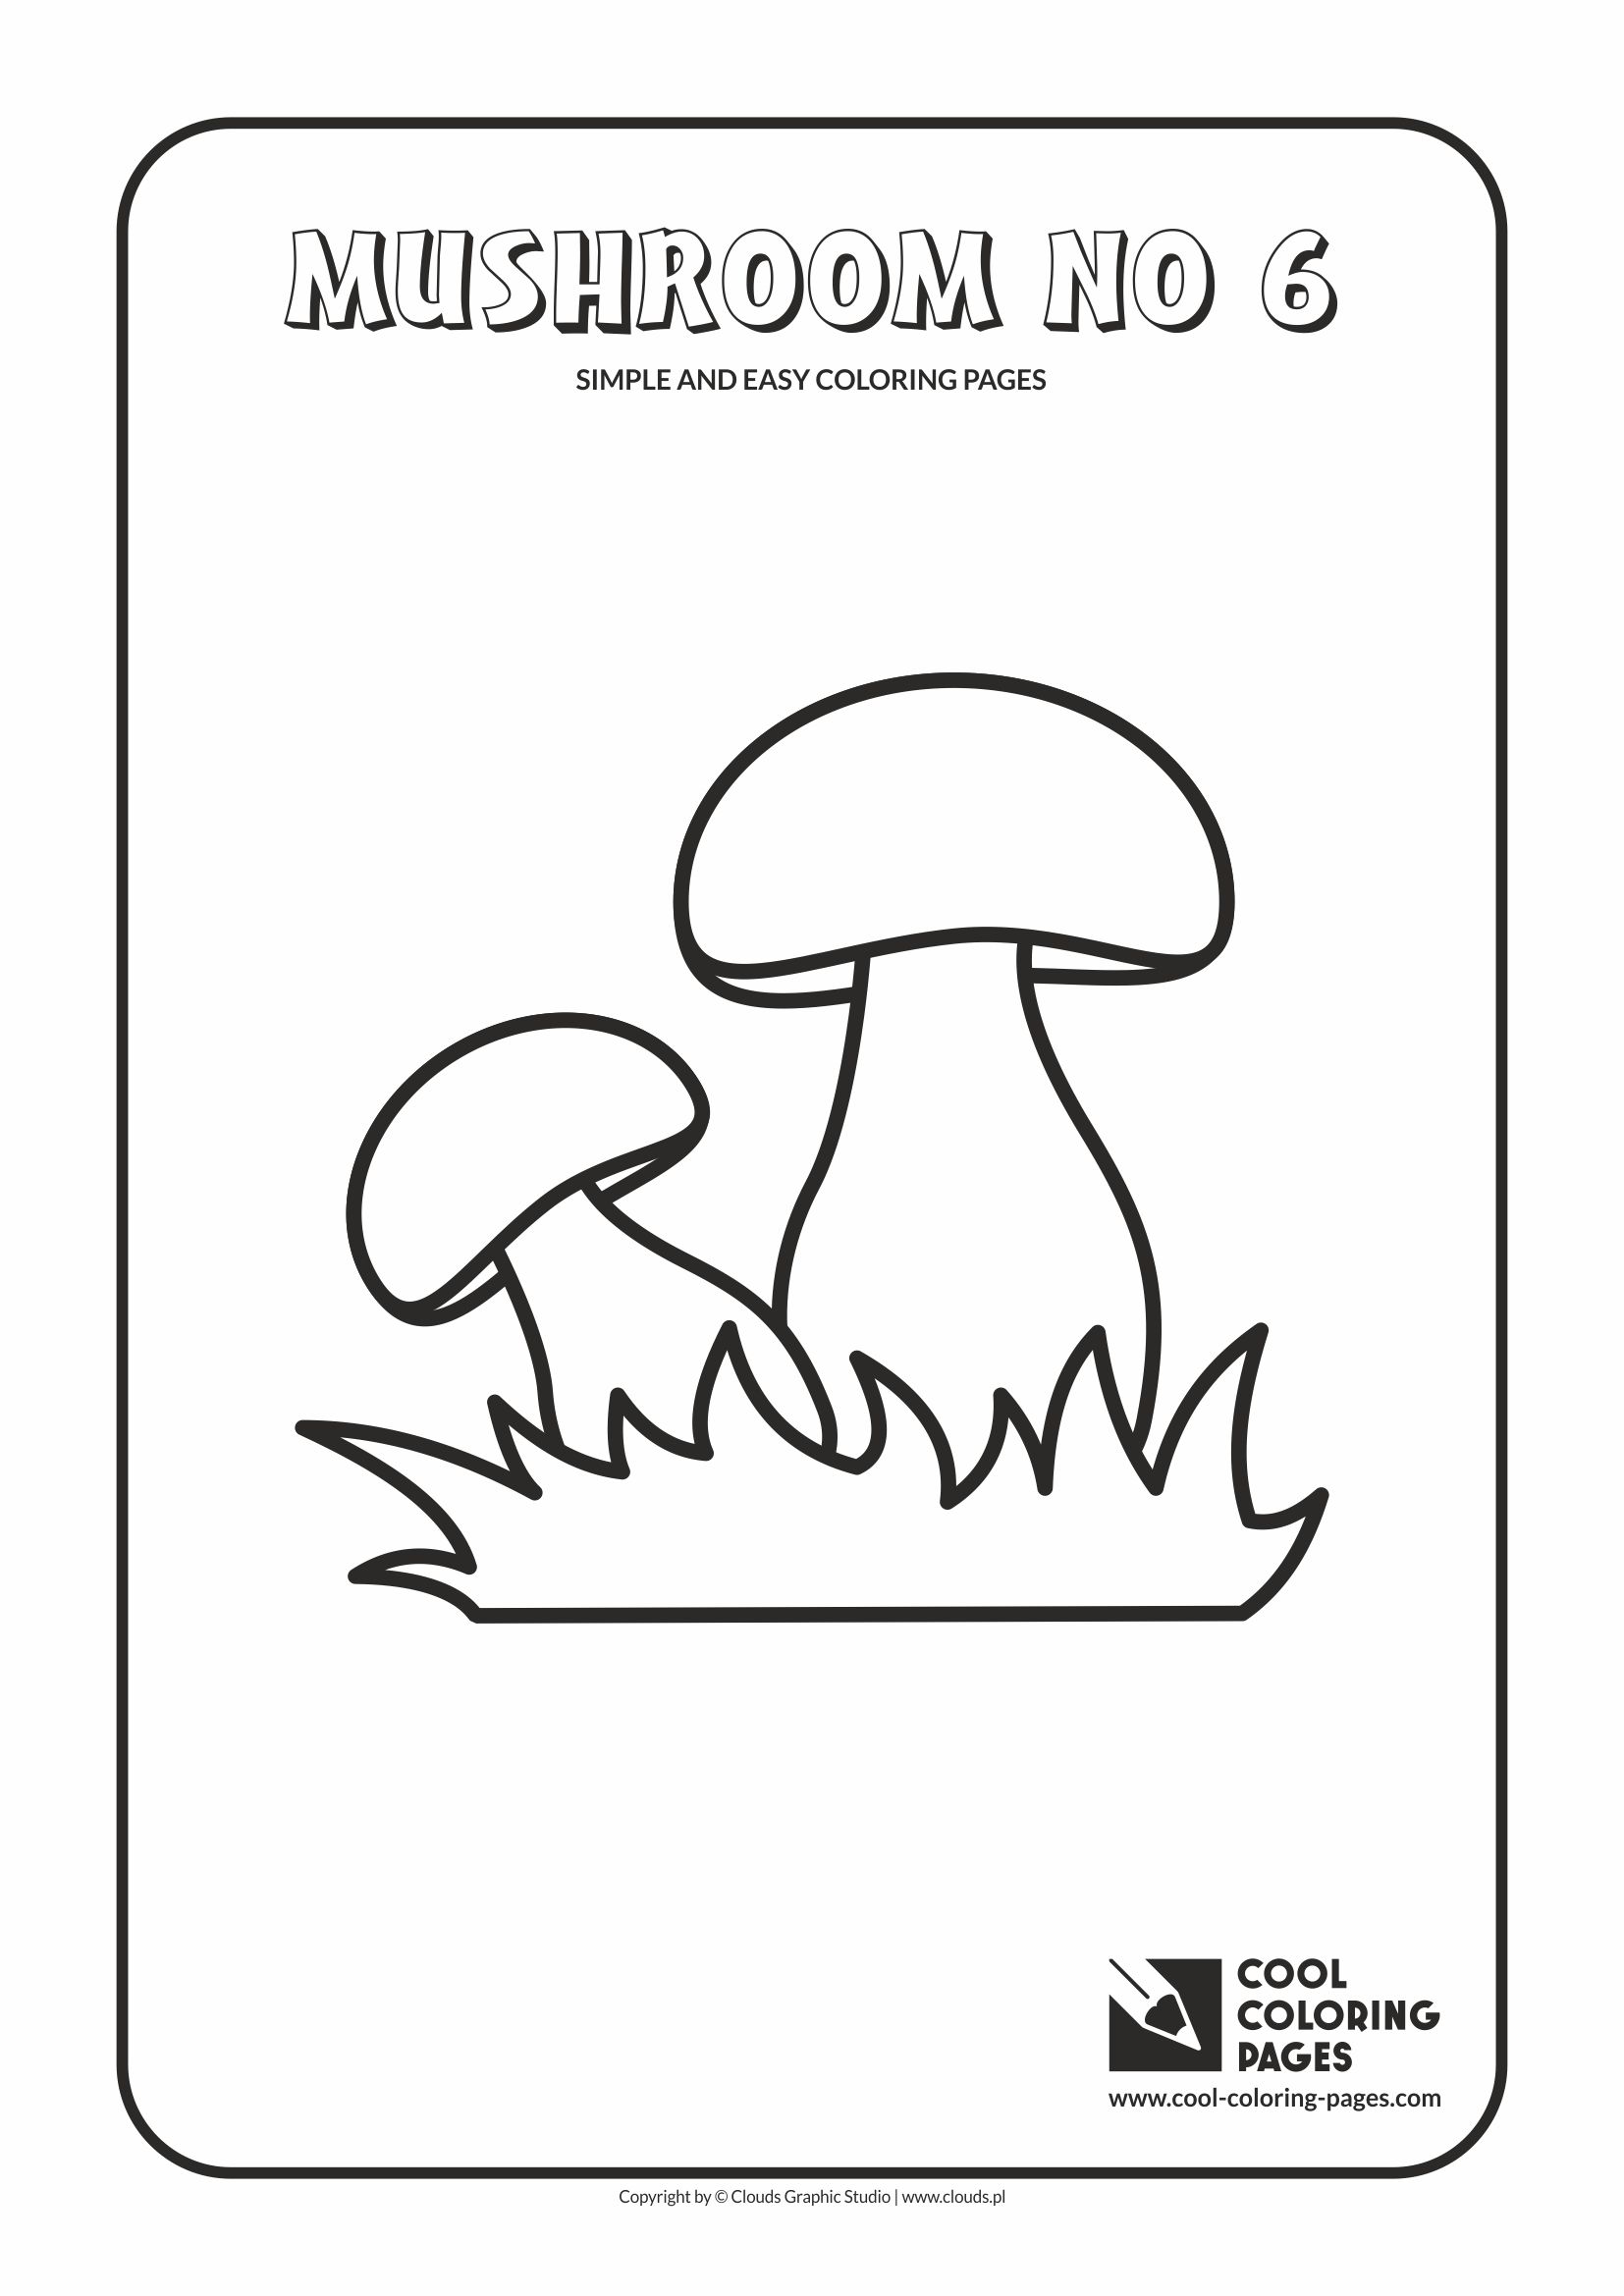 Simple and easy coloring pages for toddlers - Mushroom no 6